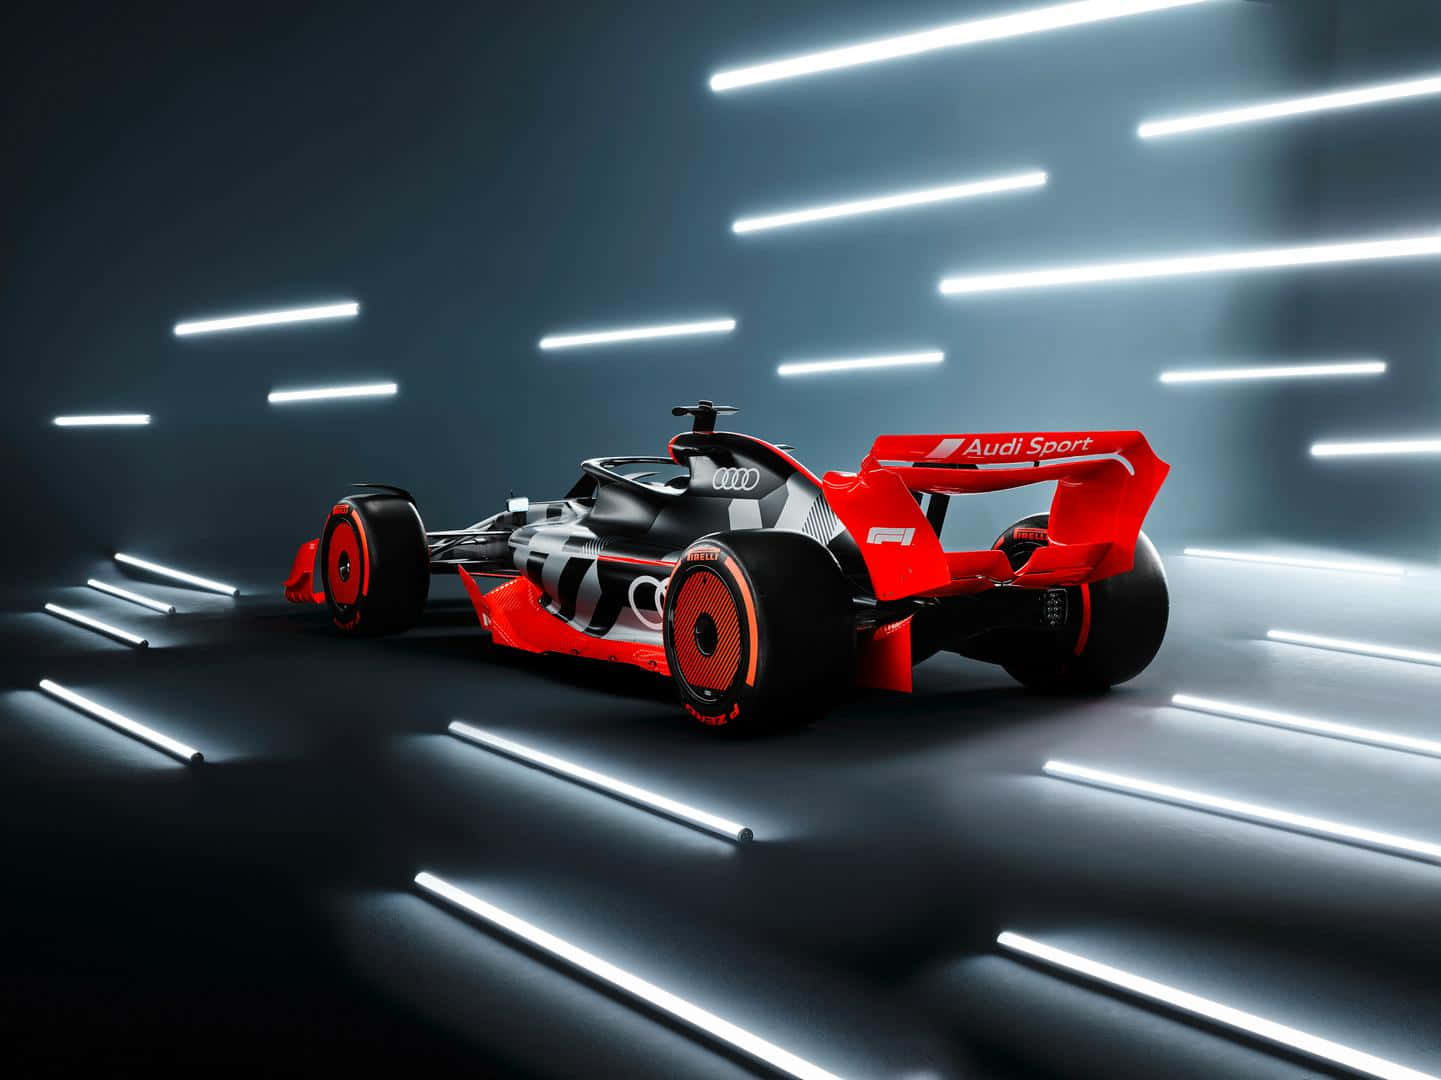 A Racing Car Is Shown In A Dark Room